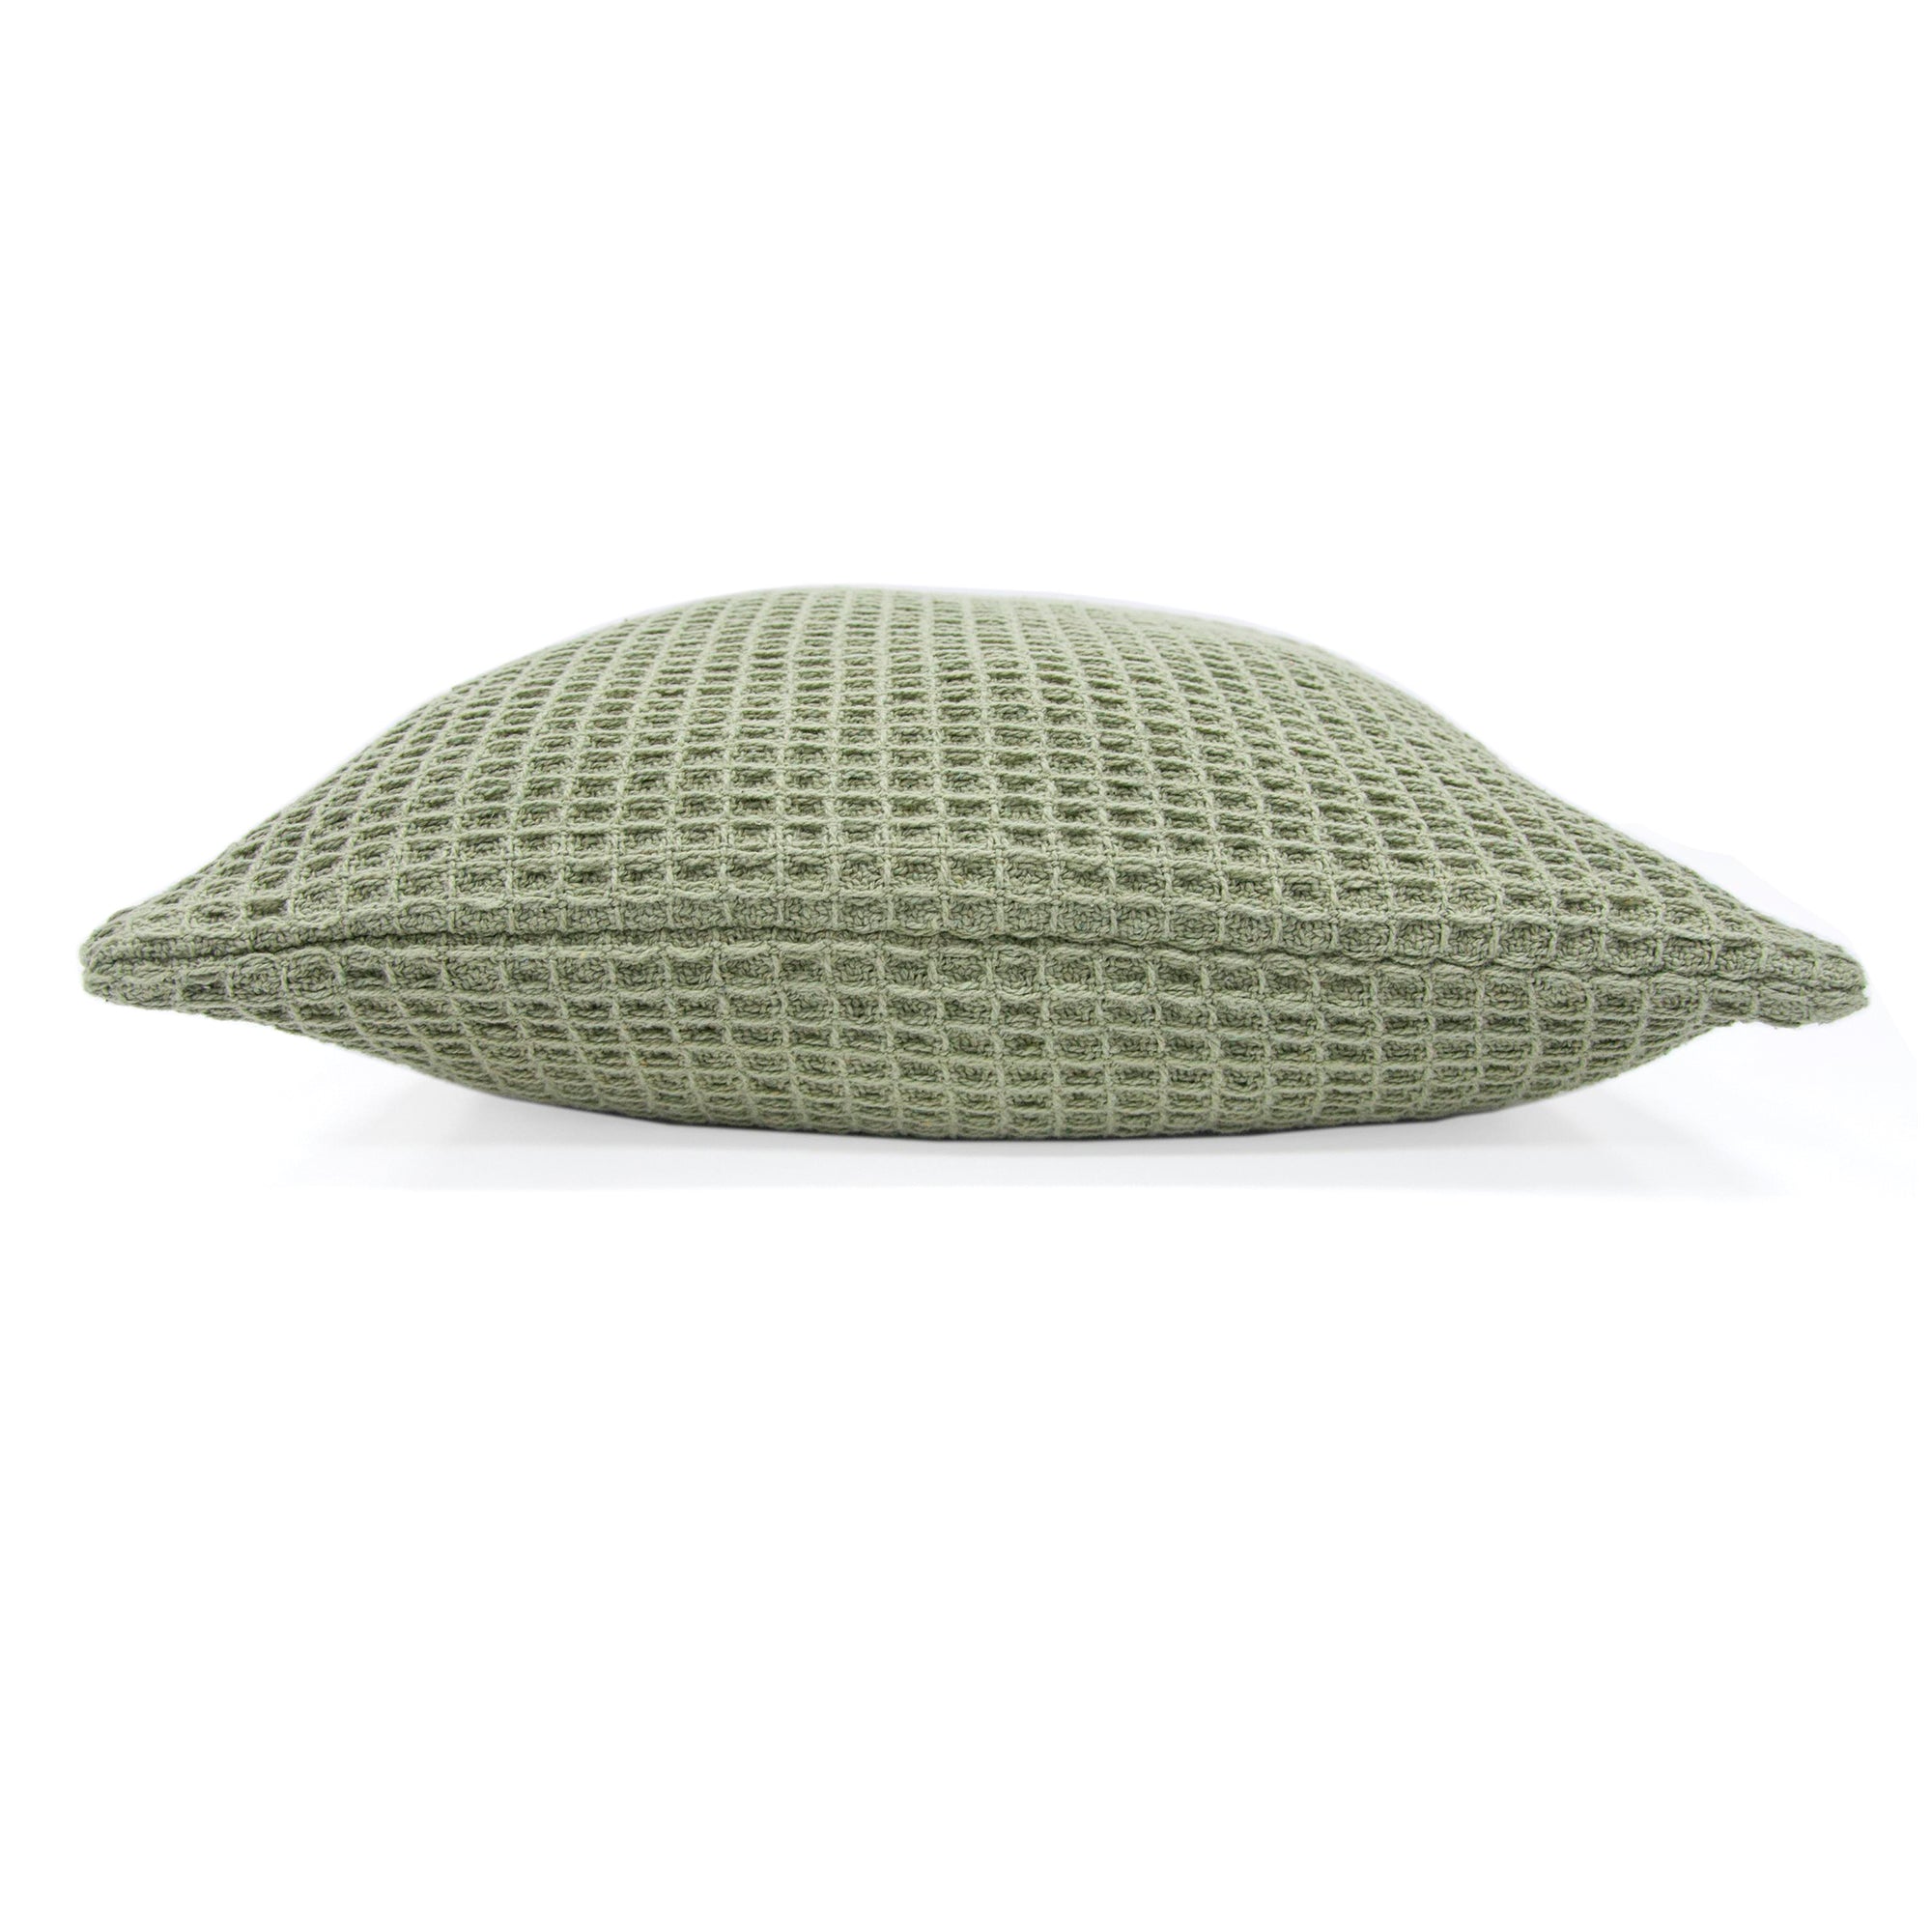 Bruges - Waffle Filled Cushion in Khaki - by Appletree Loft